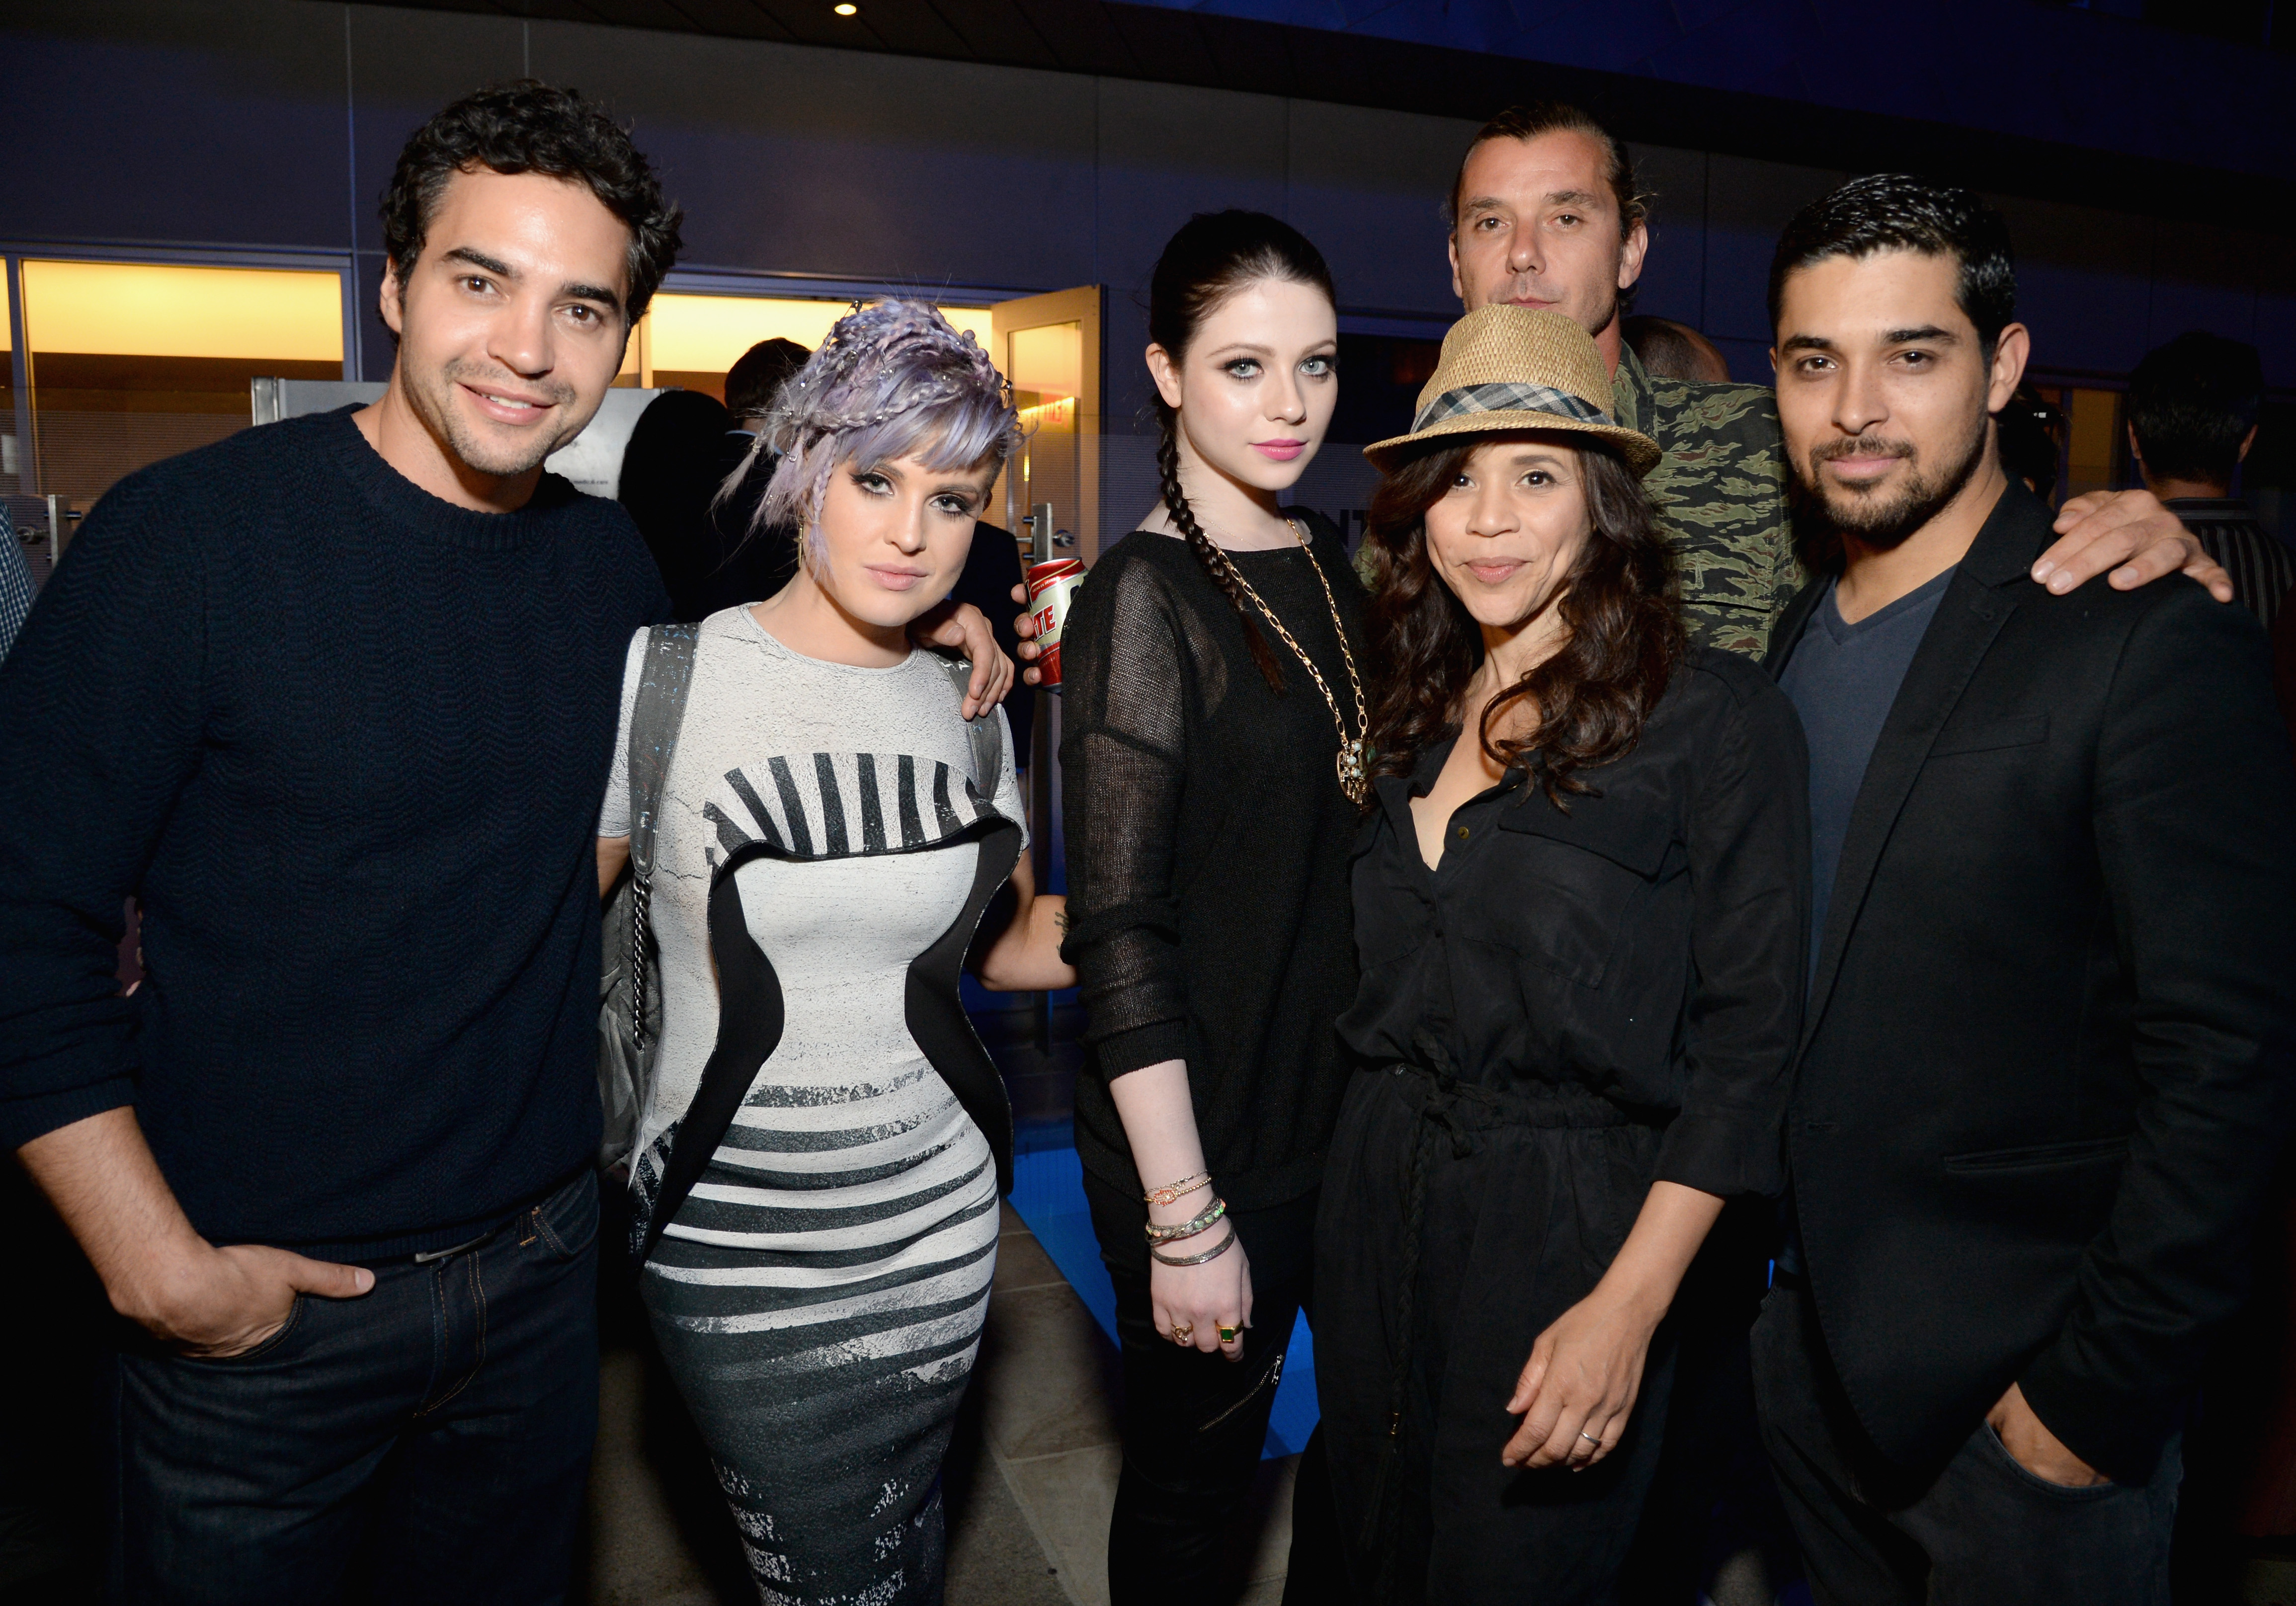 Montblanc Presents The 4th Annual Production Of The 24 Hour Plays In Los Angeles To Benefit Urban Arts Partnership - Actor Ramon Rodriguez, Tv personality Kelly Osbourne, actresses Michelle Trachtenberg and Rosie Perez, musician Gavin Rossdale and actor Wilmer Valderrama attend Montblanc and Urban Arts Partnership?s 24 Hour Plays in Los Angeles at The Shore Hotel on June 20, 2014 in Santa Monica, California.  (Photo by Michael Kovac/Getty Images for Montblanc)